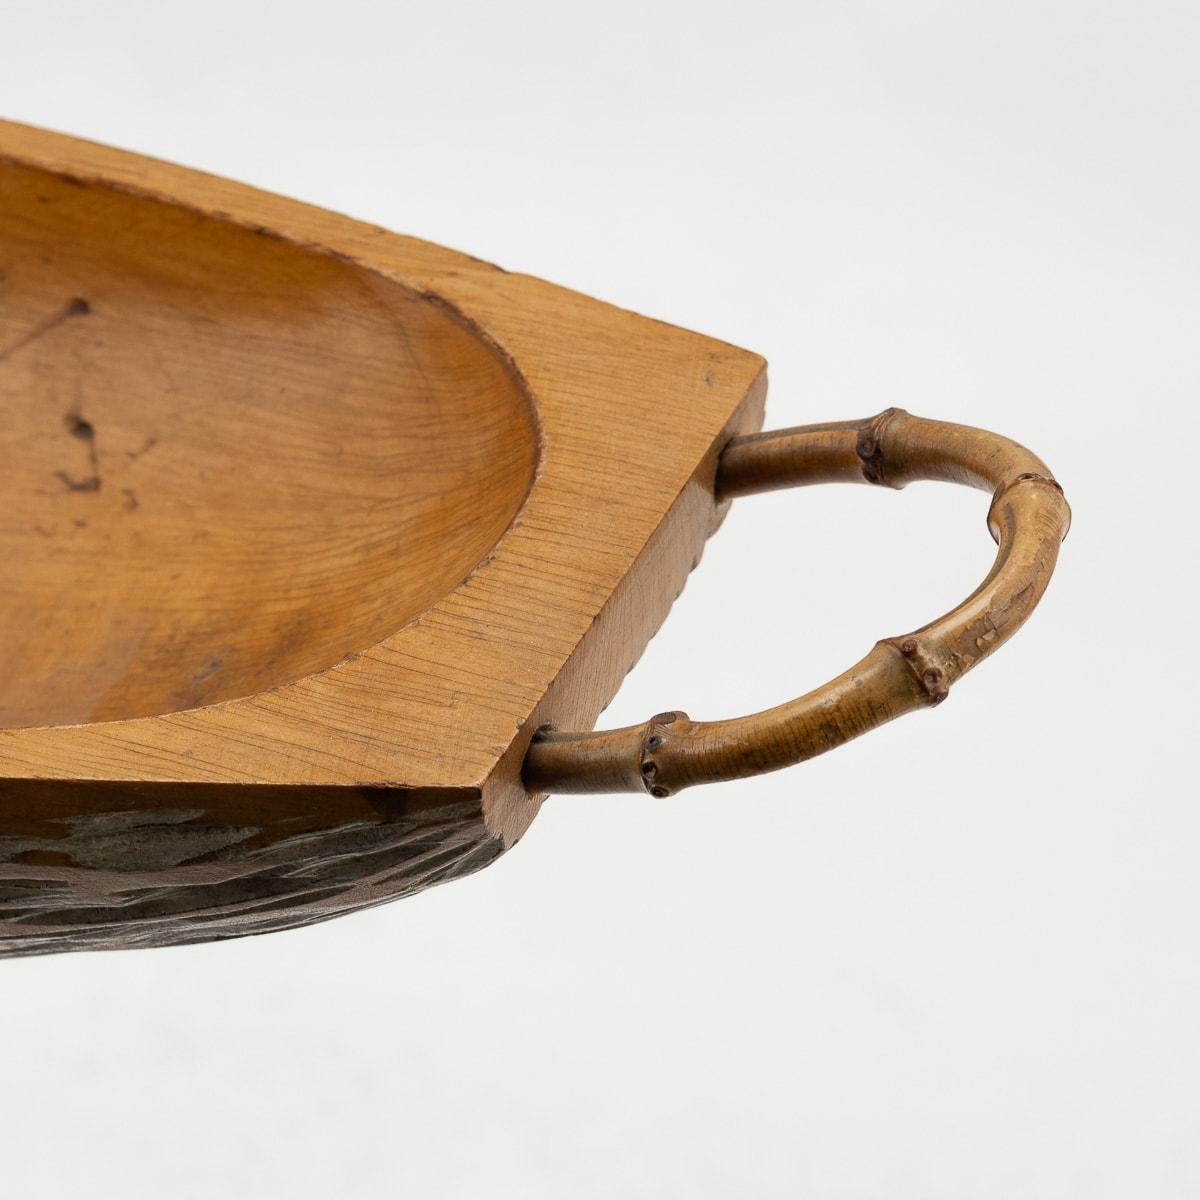 Hand-Carved 20th Century Italian Carved Wood Tray By Aldo Tura For Macabo c.1960 For Sale